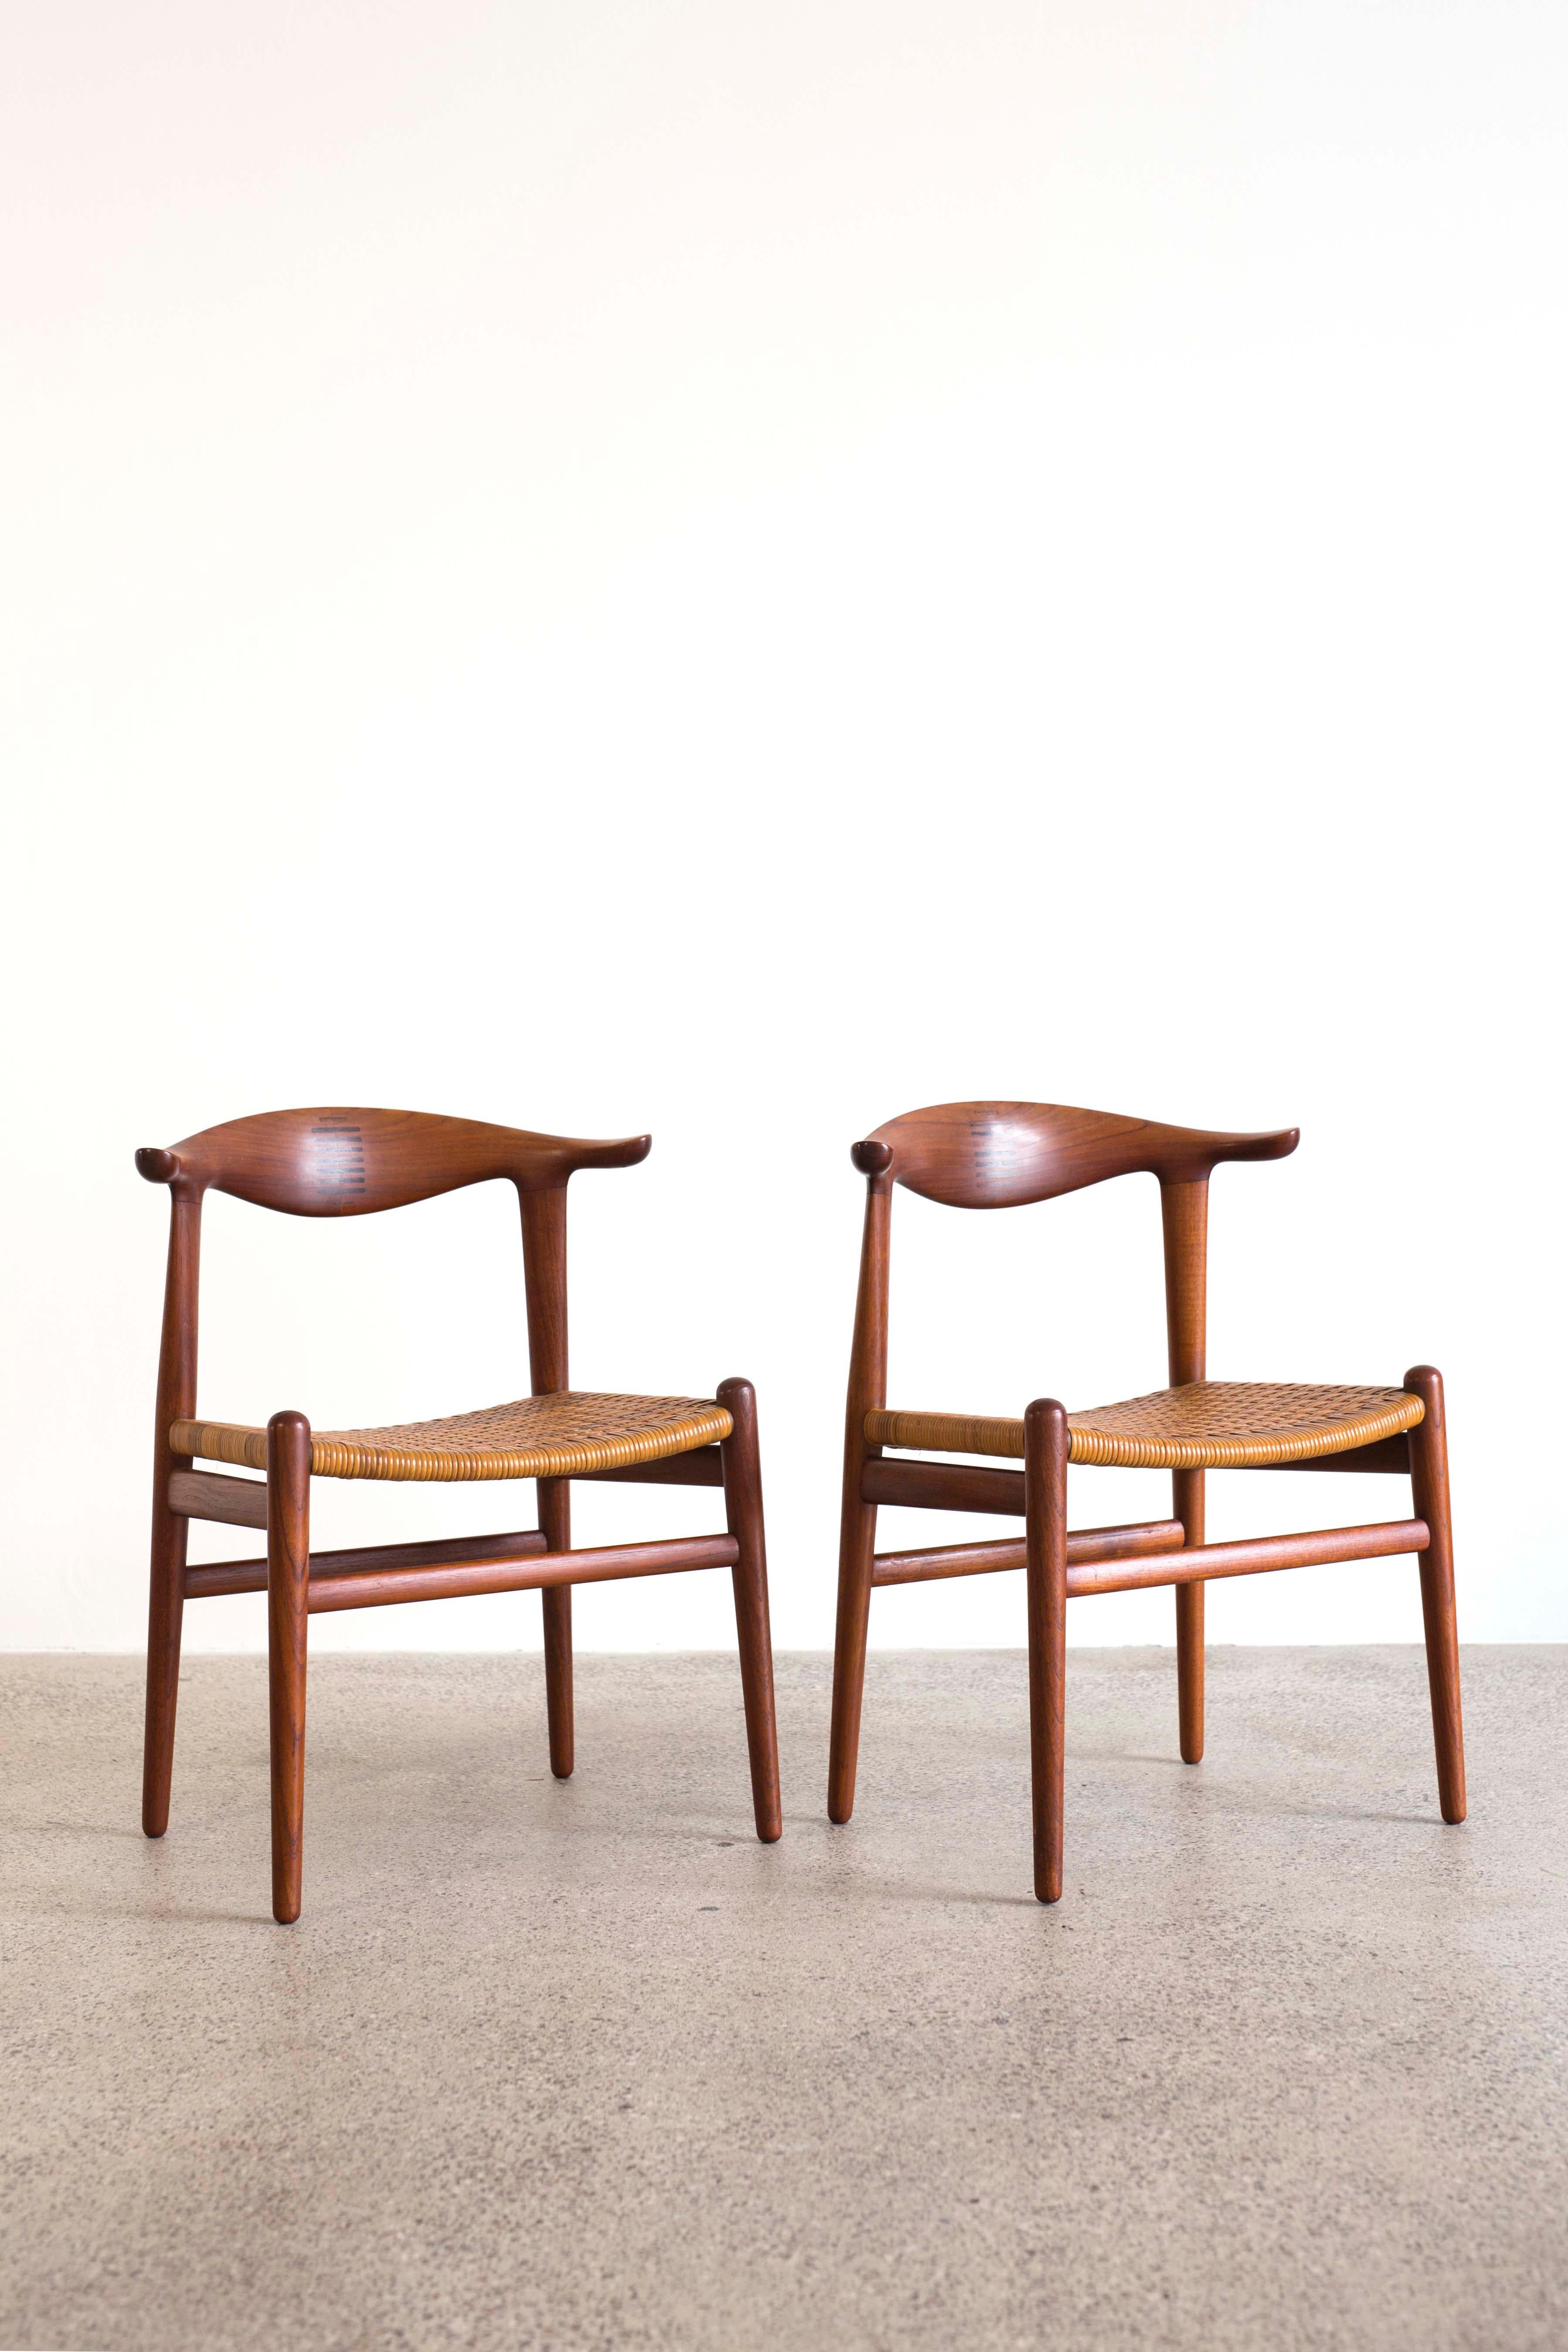 A pair of Hans J. Wegner cow horn chairs with frame of teak and Brazilian rosewood inlays, original cane seat.
Designed 1952, executed and marked at cabinetmaker Johannes Hansen, Denmark.